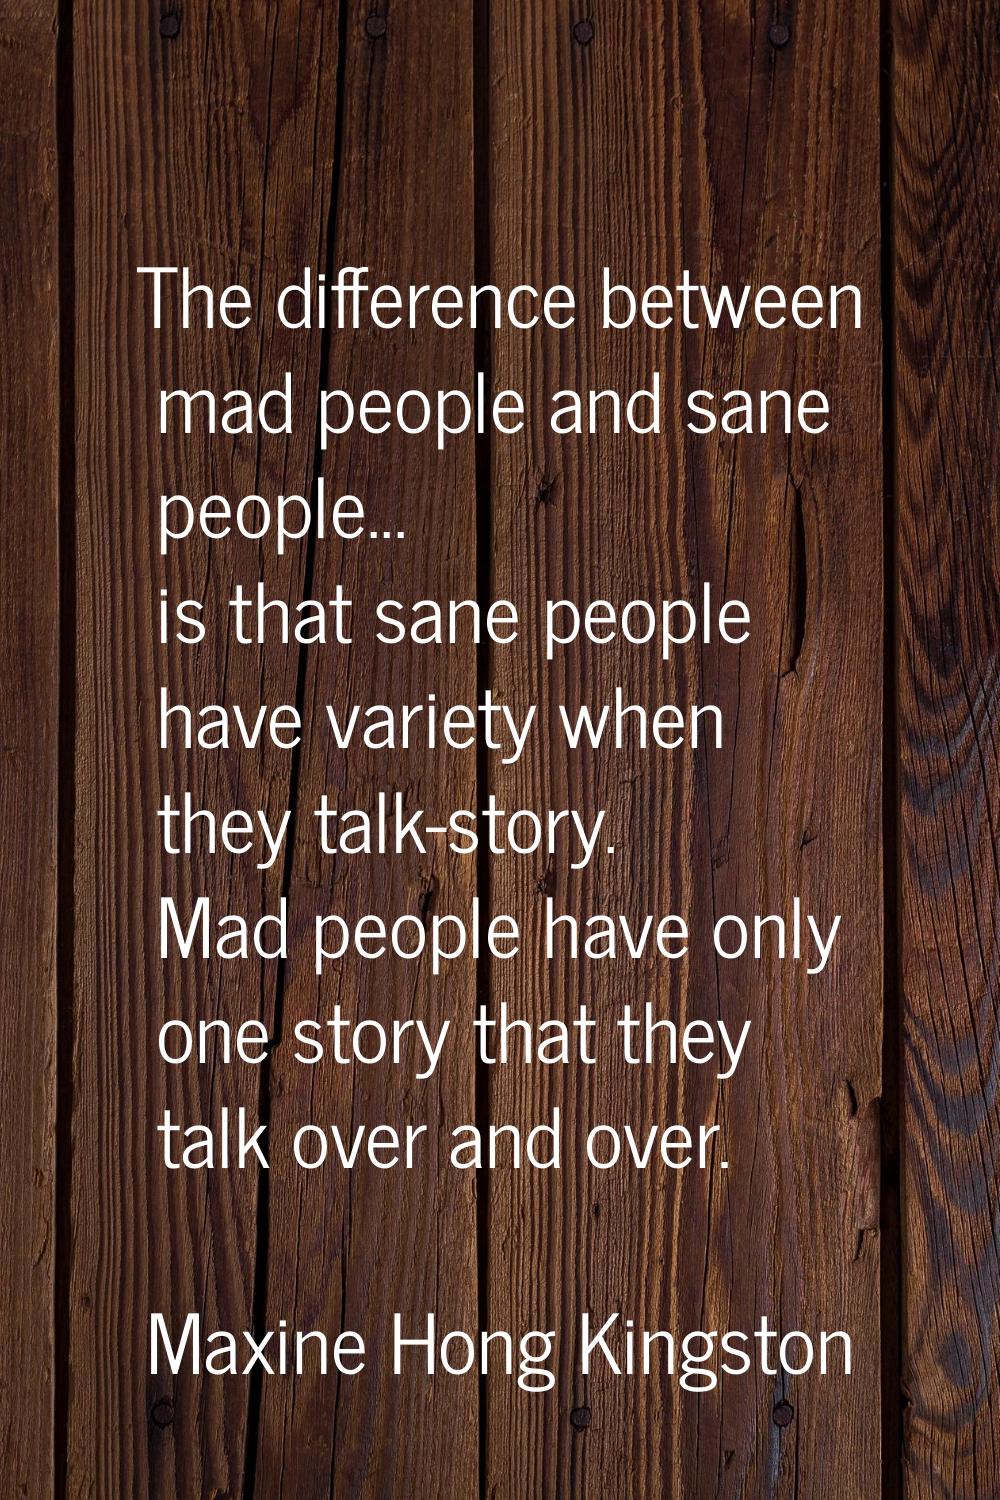 The difference between mad people and sane people... is that sane people have variety when they tal